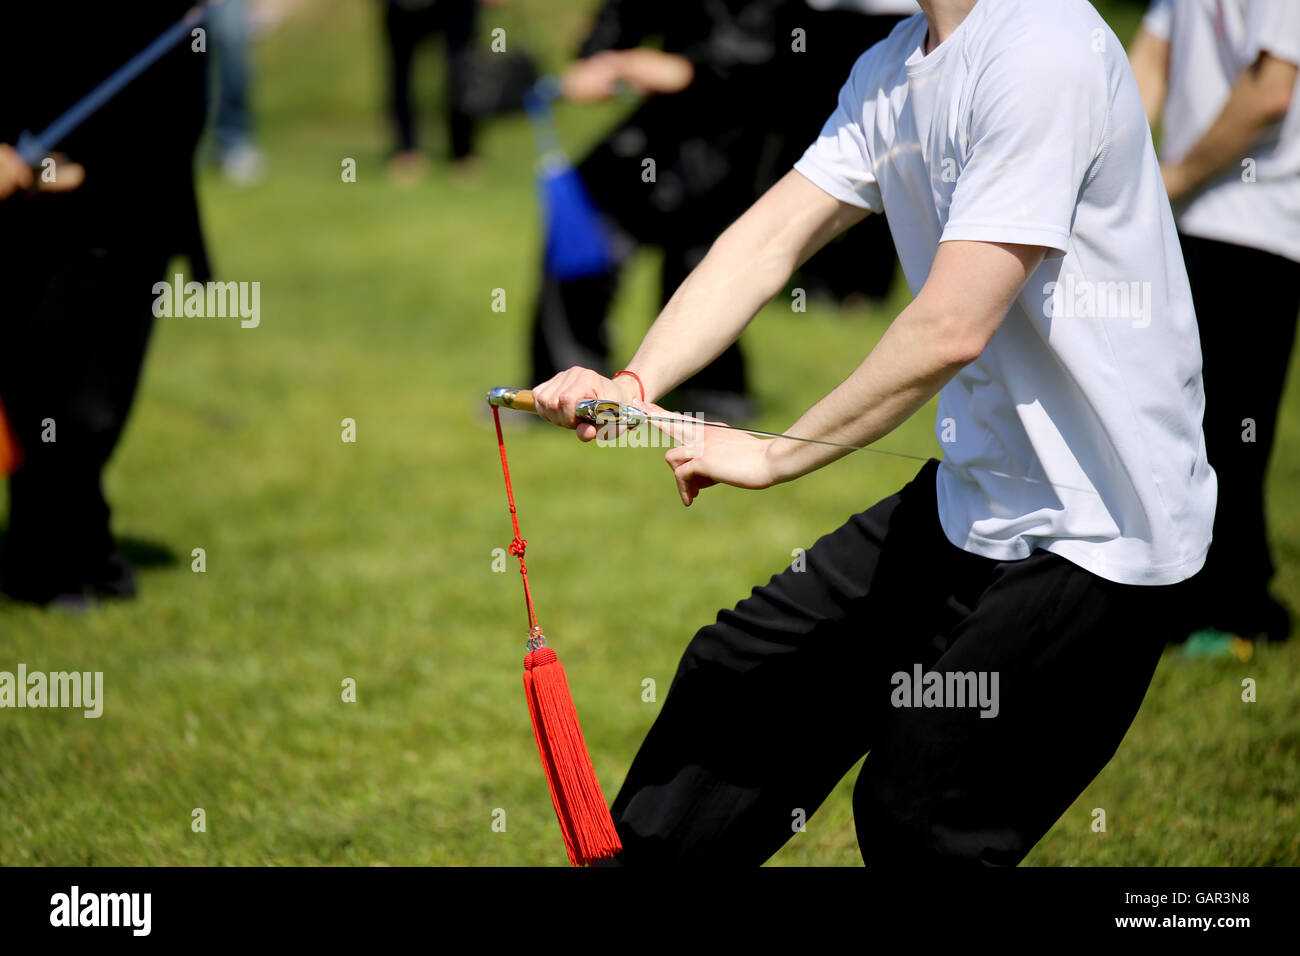 Tai Chi martial arts athlete expert makes motions with sword Stock Photo